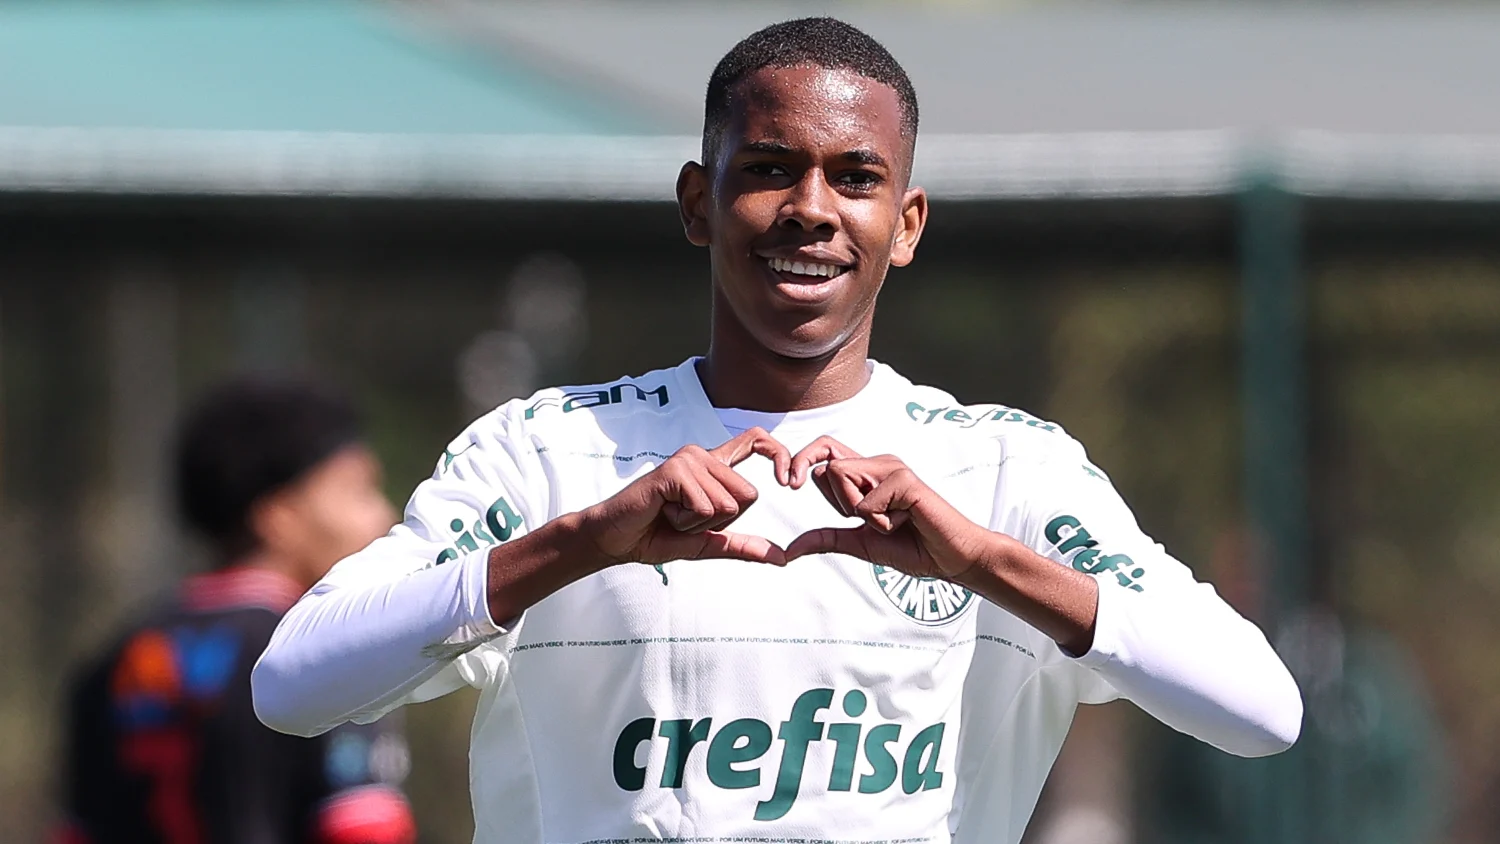 Romano reveals that Chelsea hasn't placed a bid yet for the Brazilian superstar